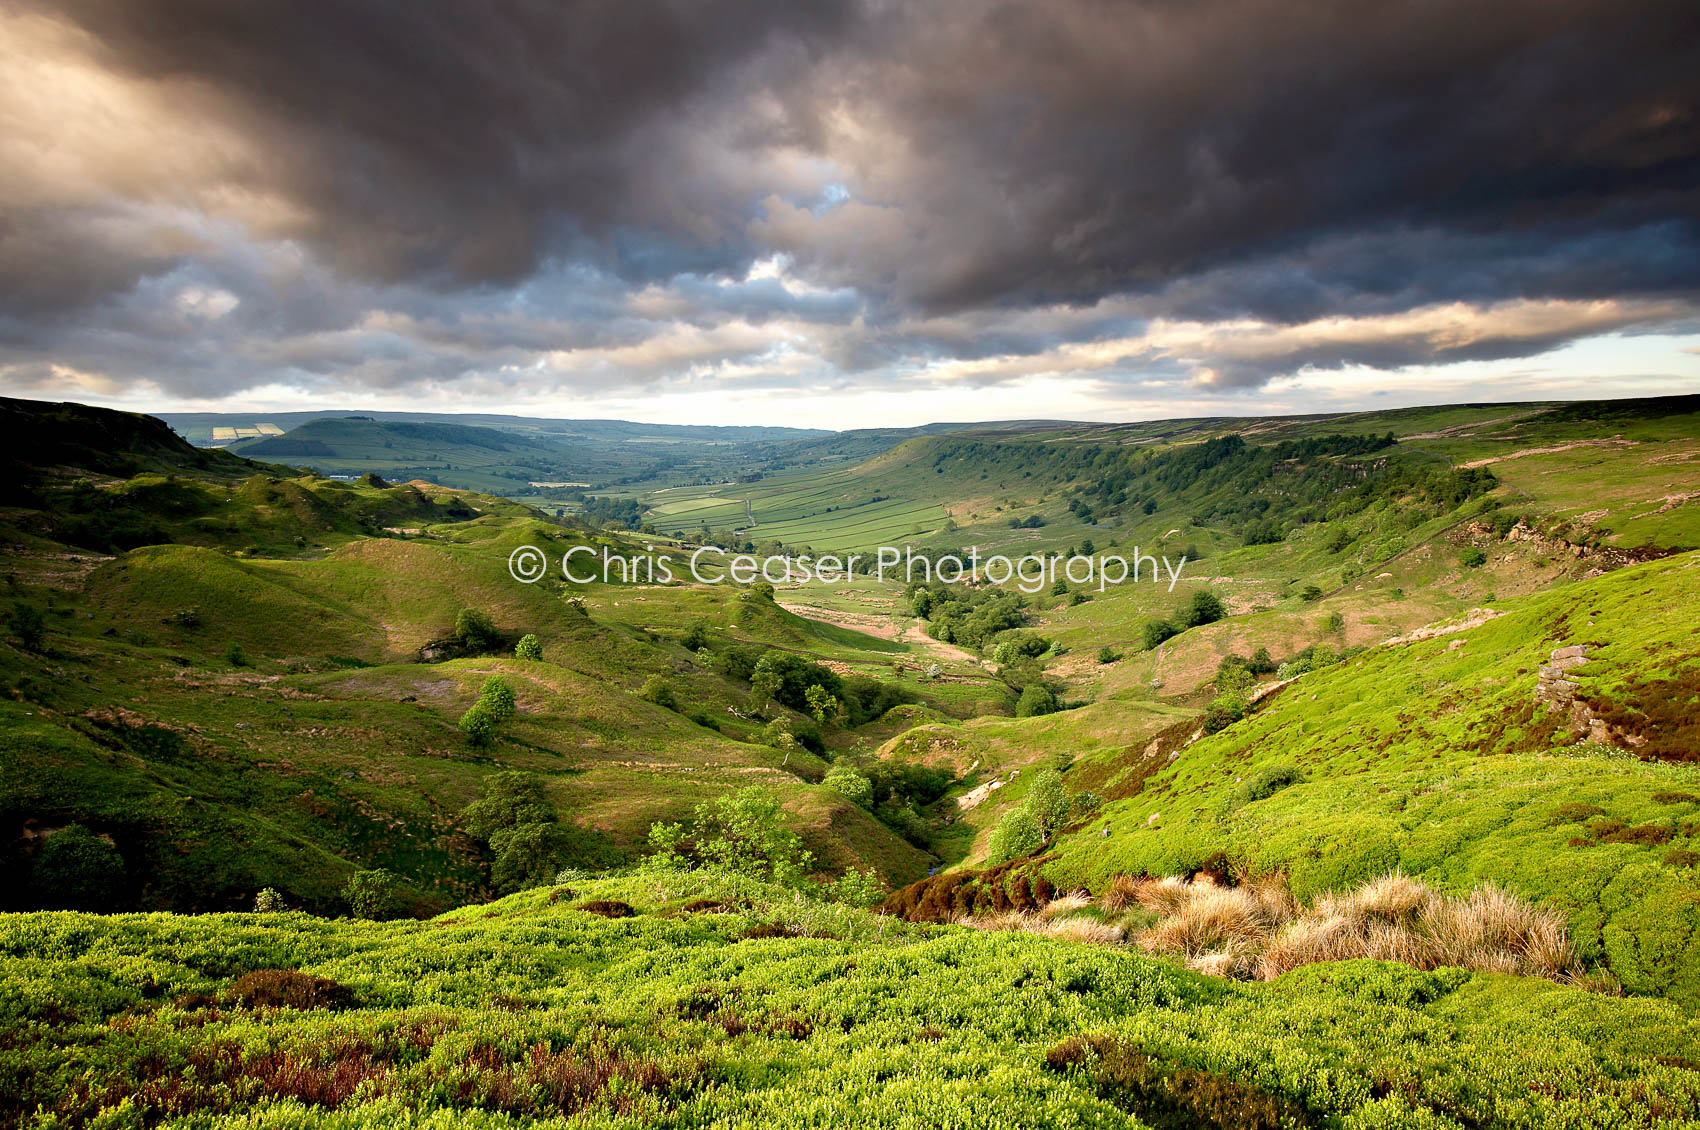 Stormclouds over Fryup Dale